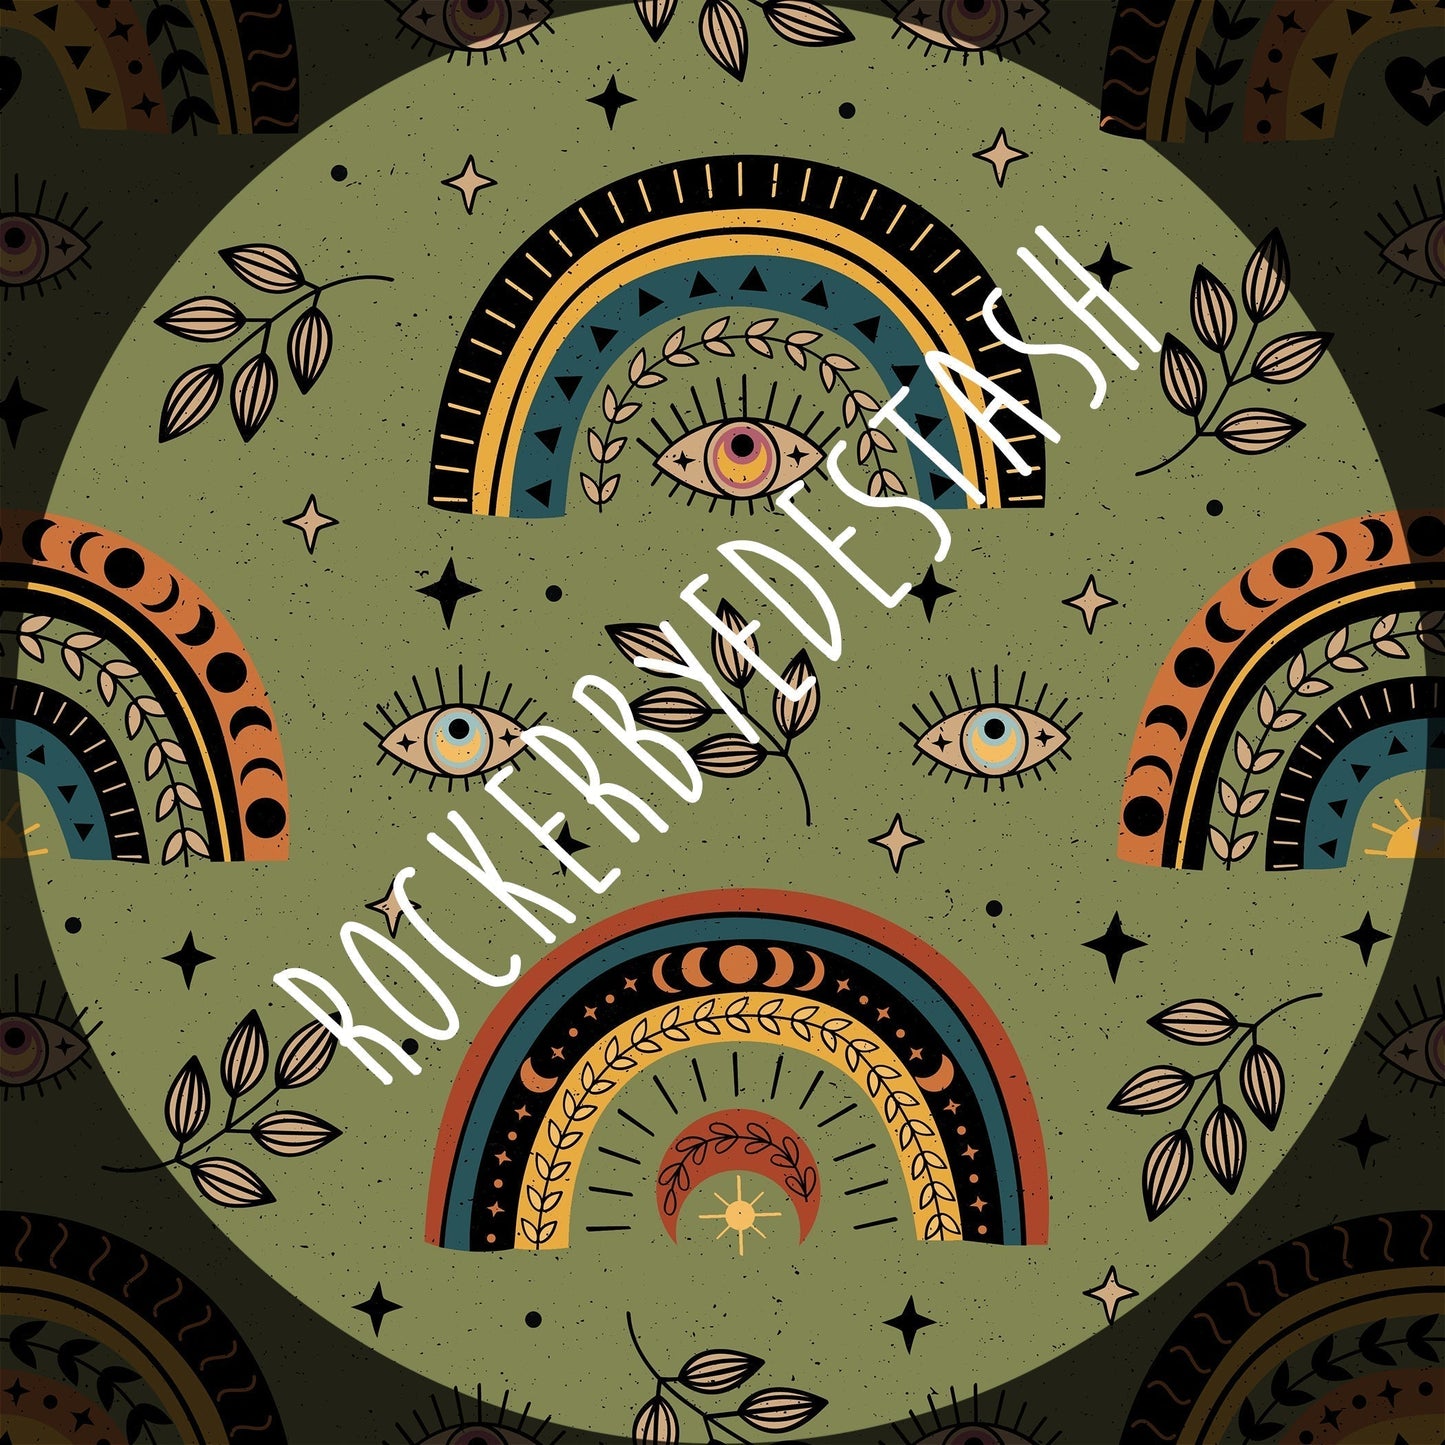 Minky - Round OO - Skulls & Shrooms, Magical Forest, New Wilderness & Hedgies - Fabric Retail